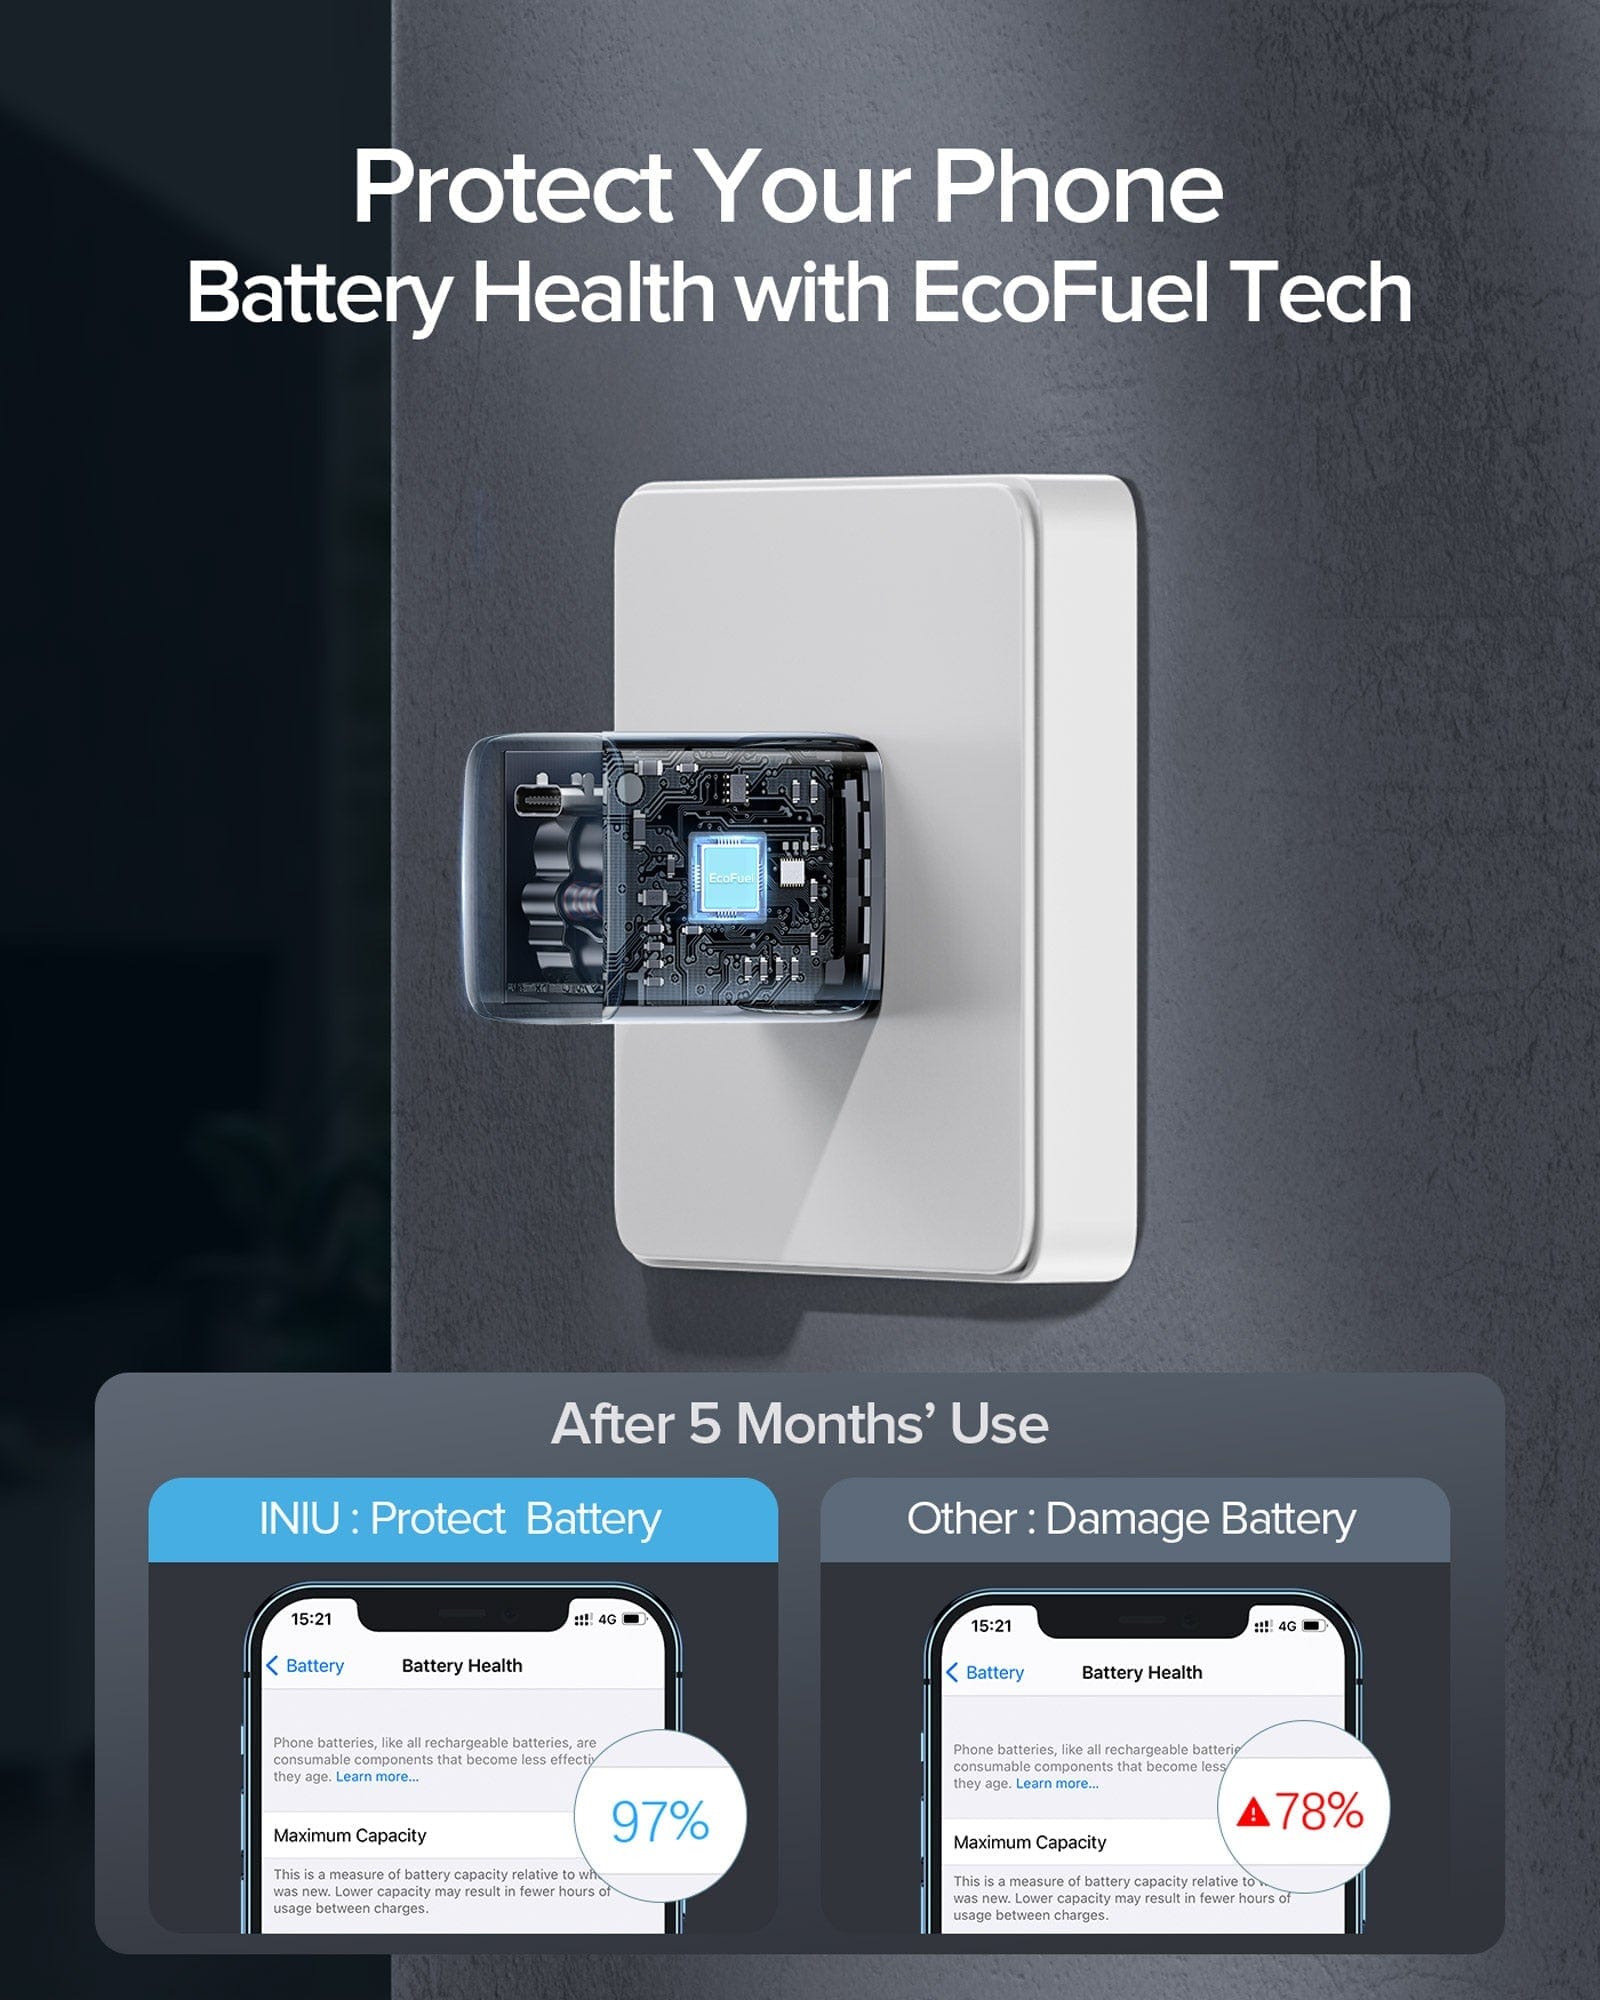 Protect Your Phone Battery Health With EcoFuel Tech